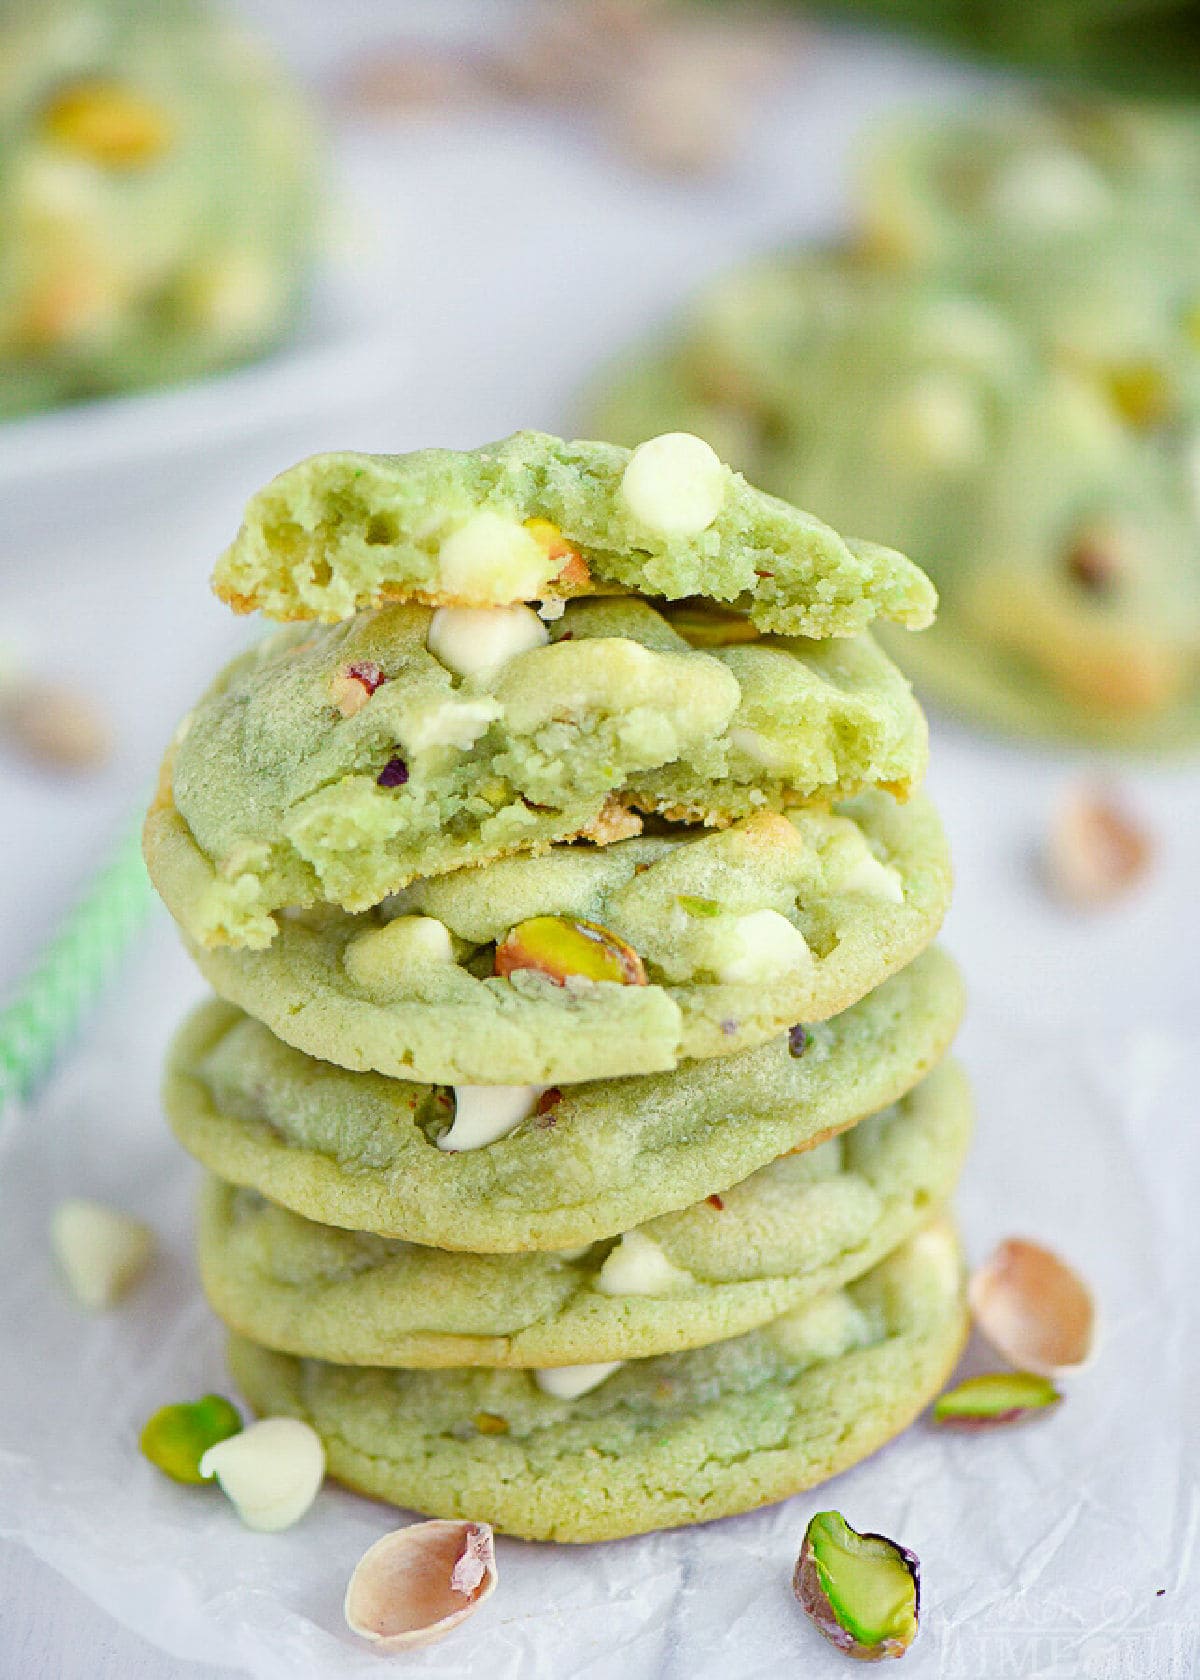 stack of pistachio pudding cookies with the top cookie broken in half. more cookies can be seen in the background.